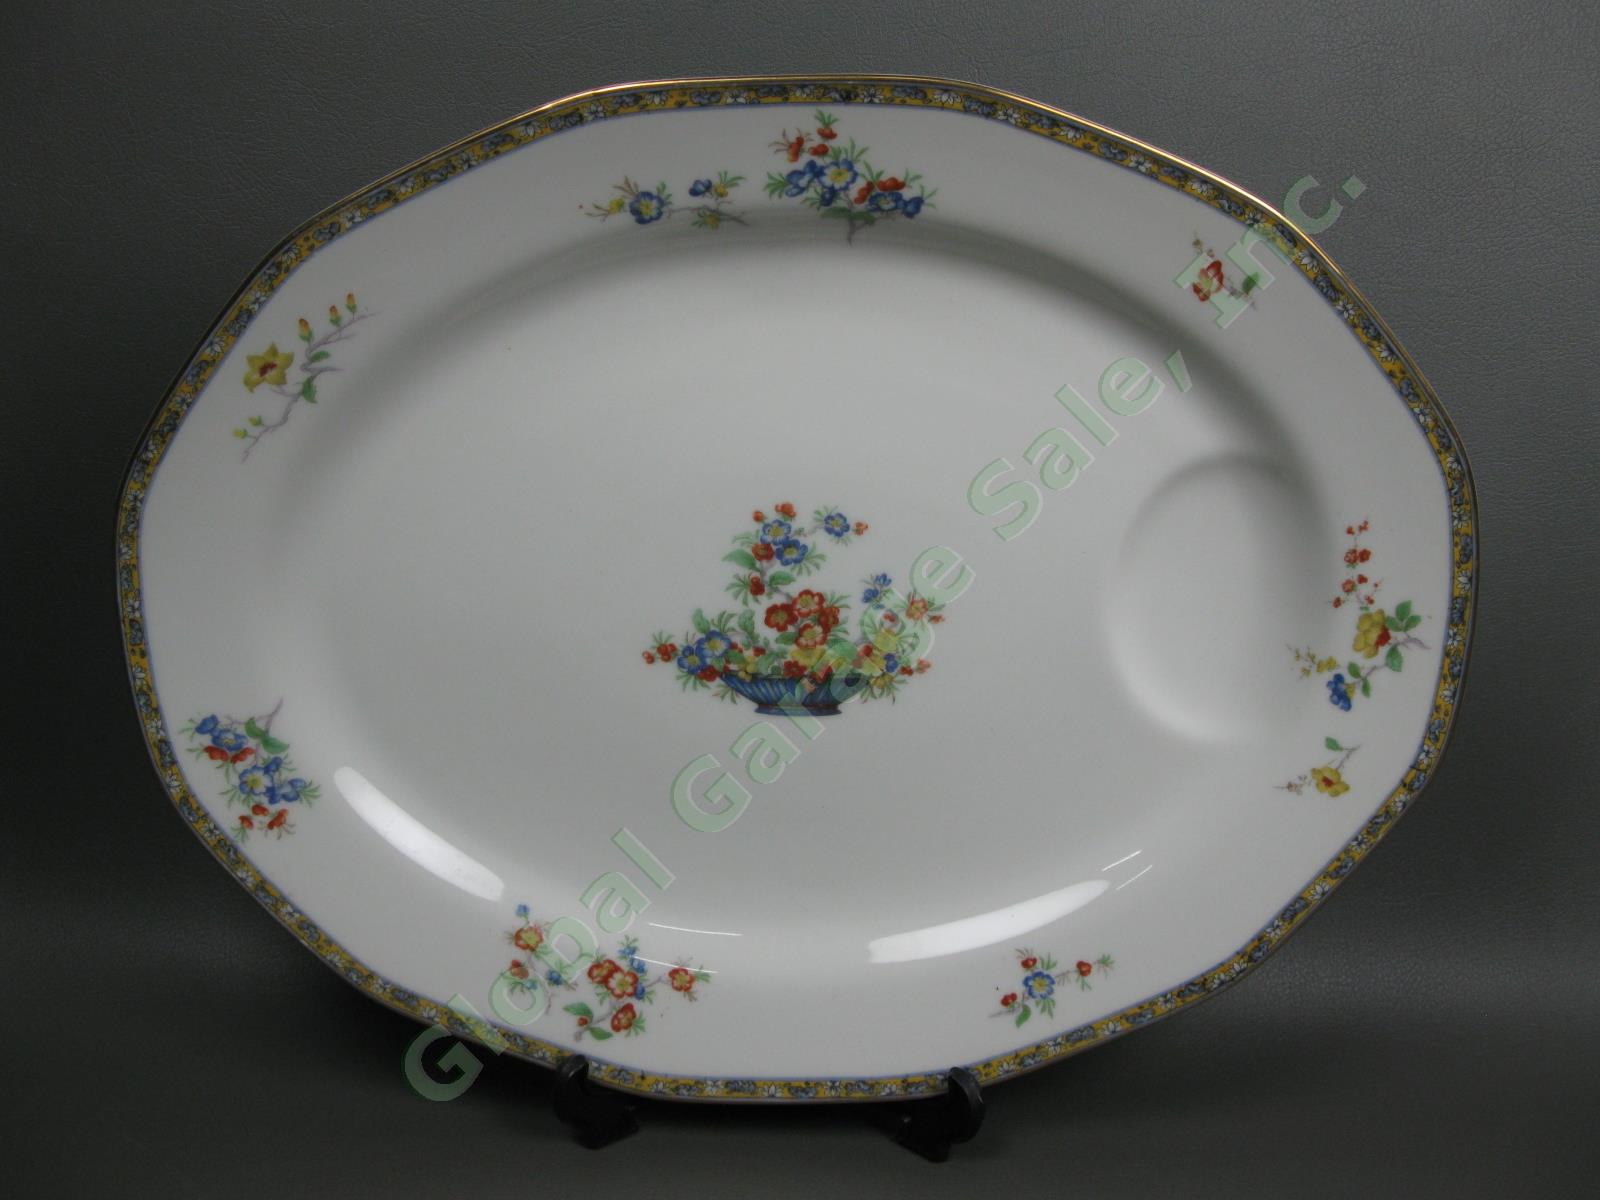 Theodore Haviland Montreux Mongolia 15" Large Oval Serving Platter Tray Limoges